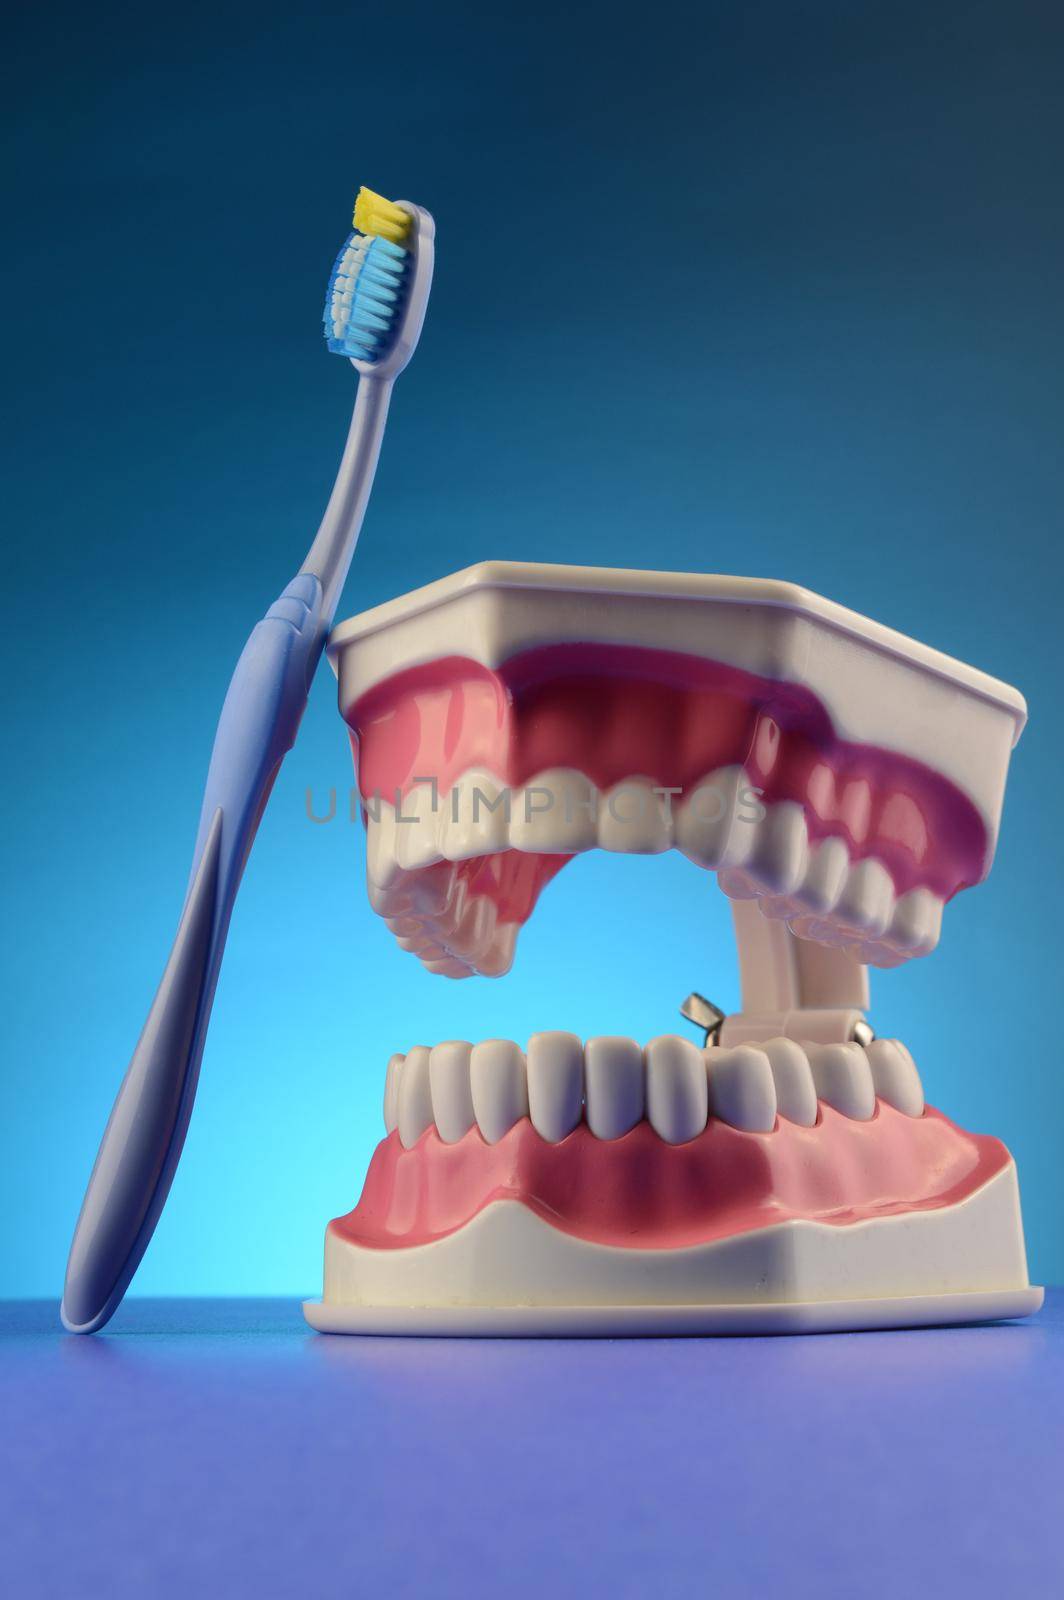 A display of dental teeth and a toothbrush over blue for dentist purposes.